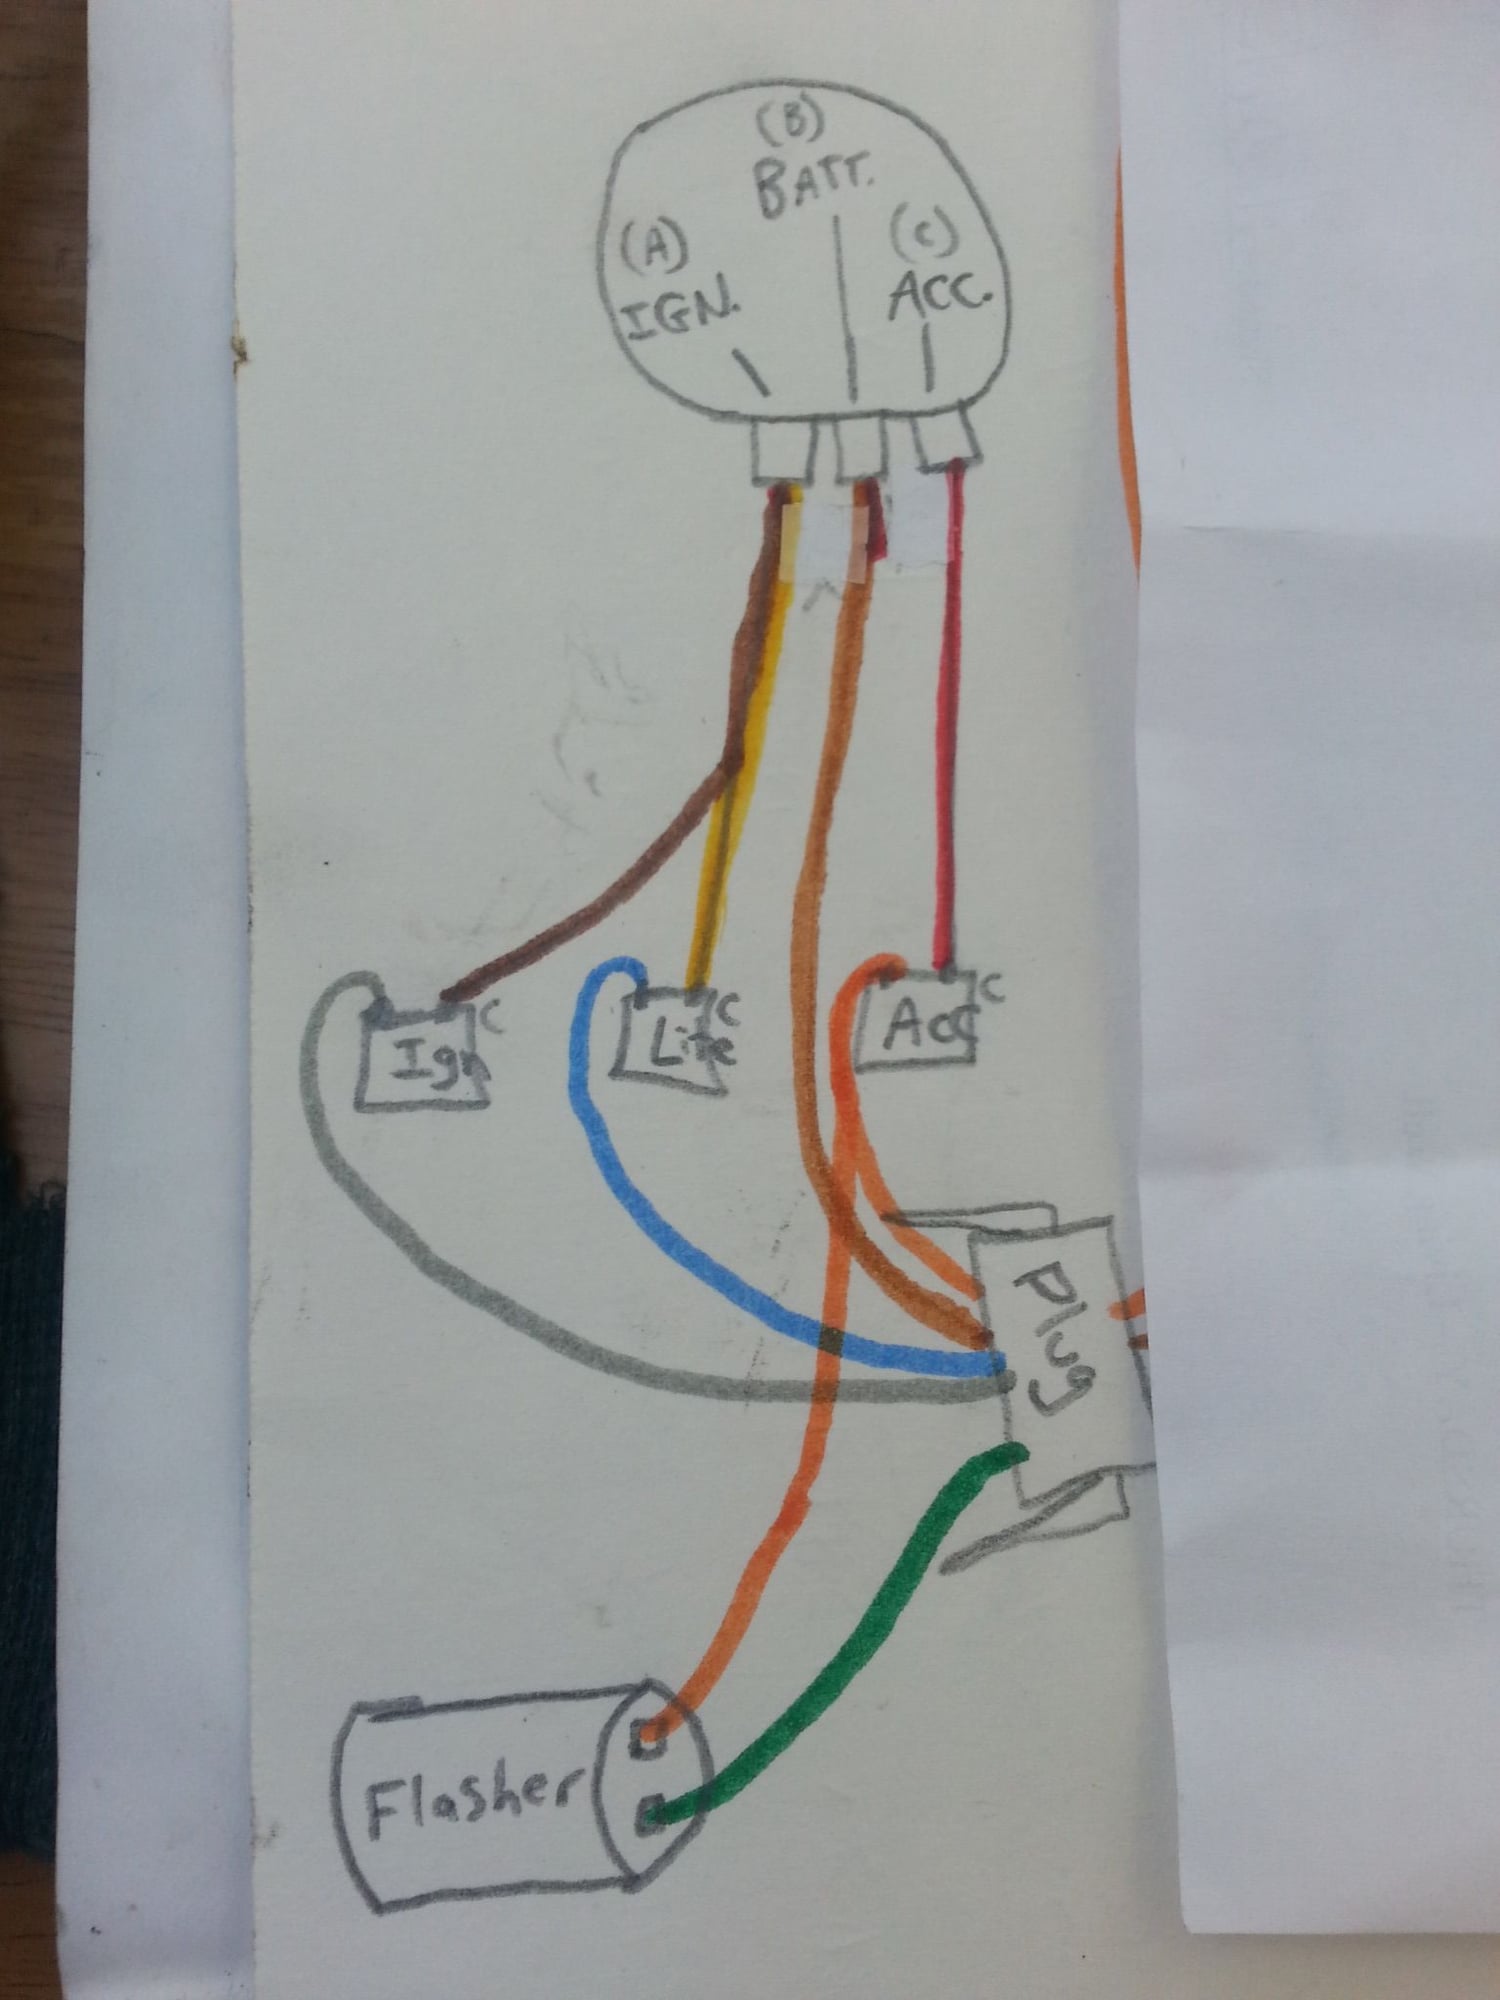 6 Prong Ignition Switch Wiring Diagram from cimg5.ibsrv.net